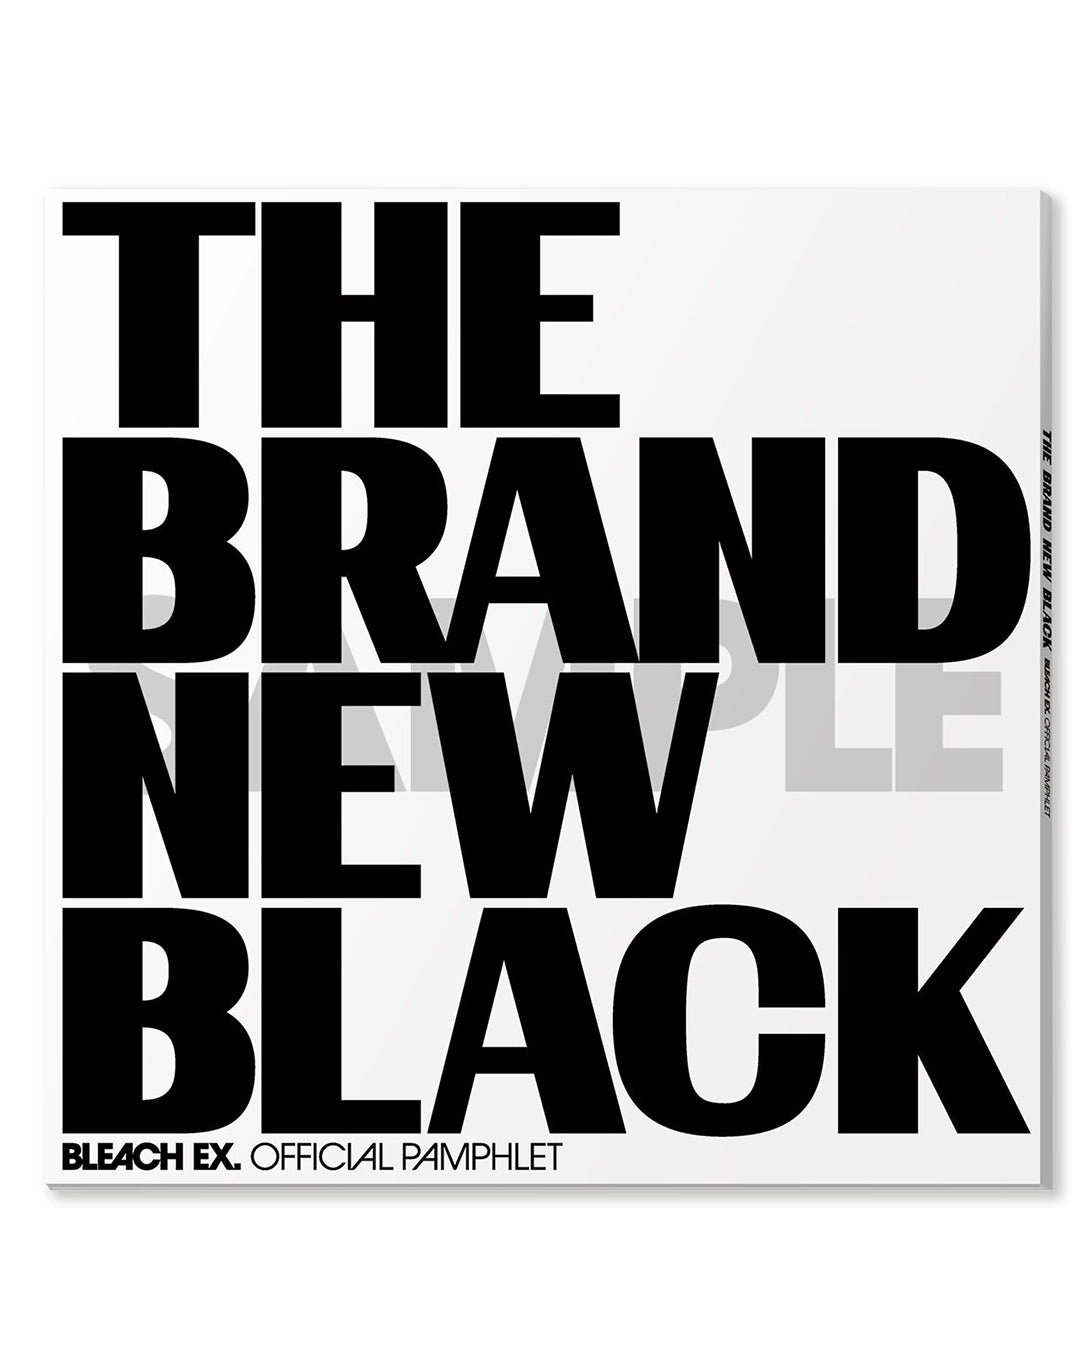 BLEACH EX. Official exhibition pamphlet - THE BRAND NEW BLACK